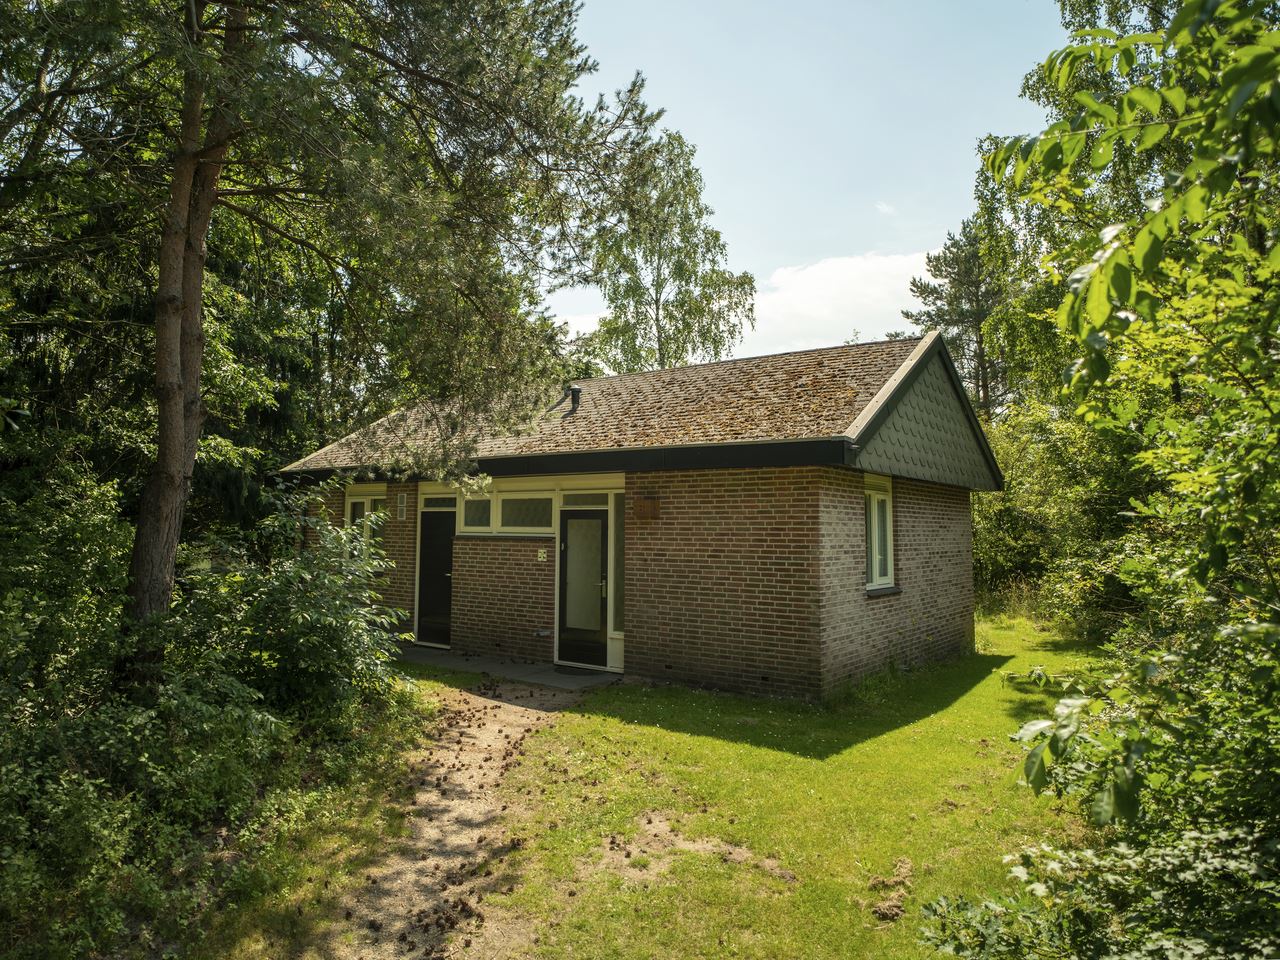 6-persoons bungalow